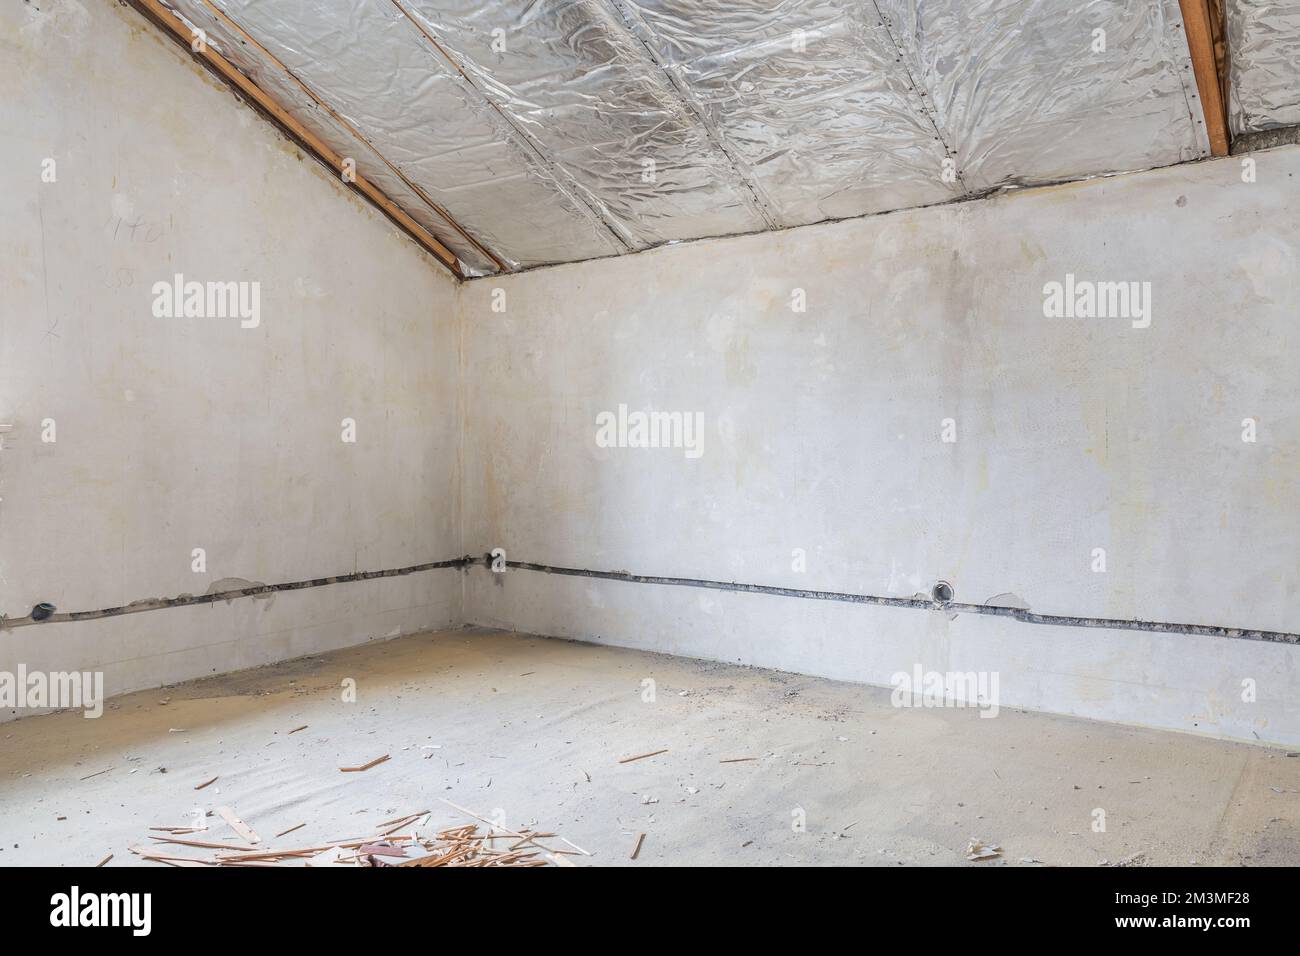 Renovation of old house, room under construction with rubble, old ceiling Stock Photo